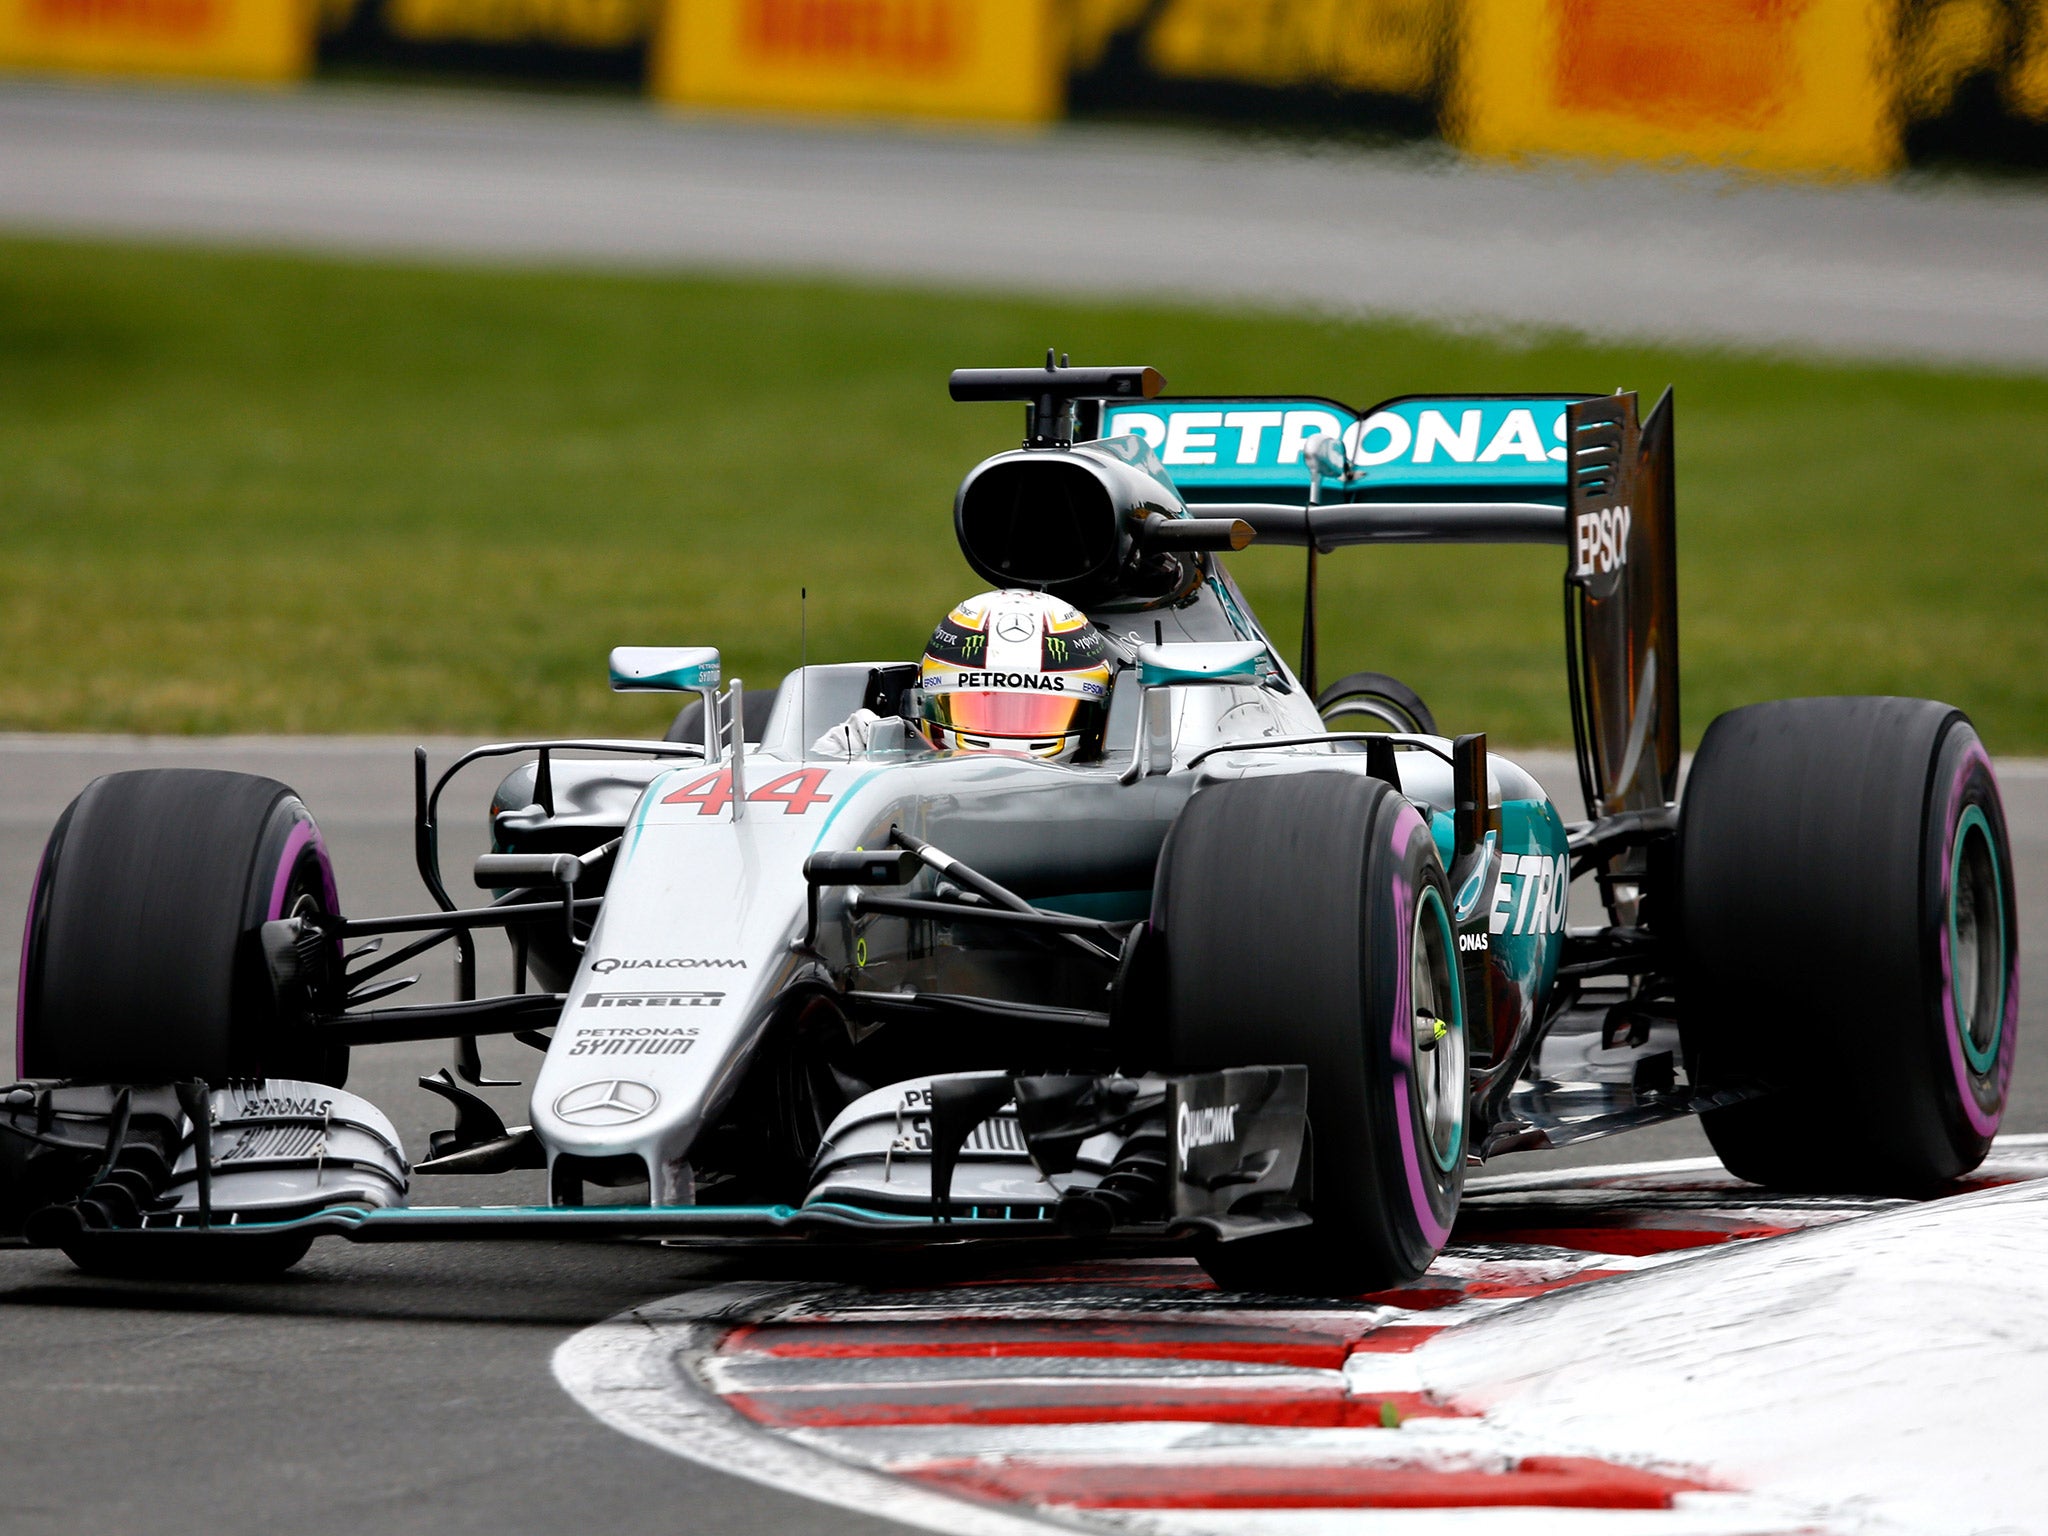 Lewis Hamilton starts on pole for the Canadian Grand Prix